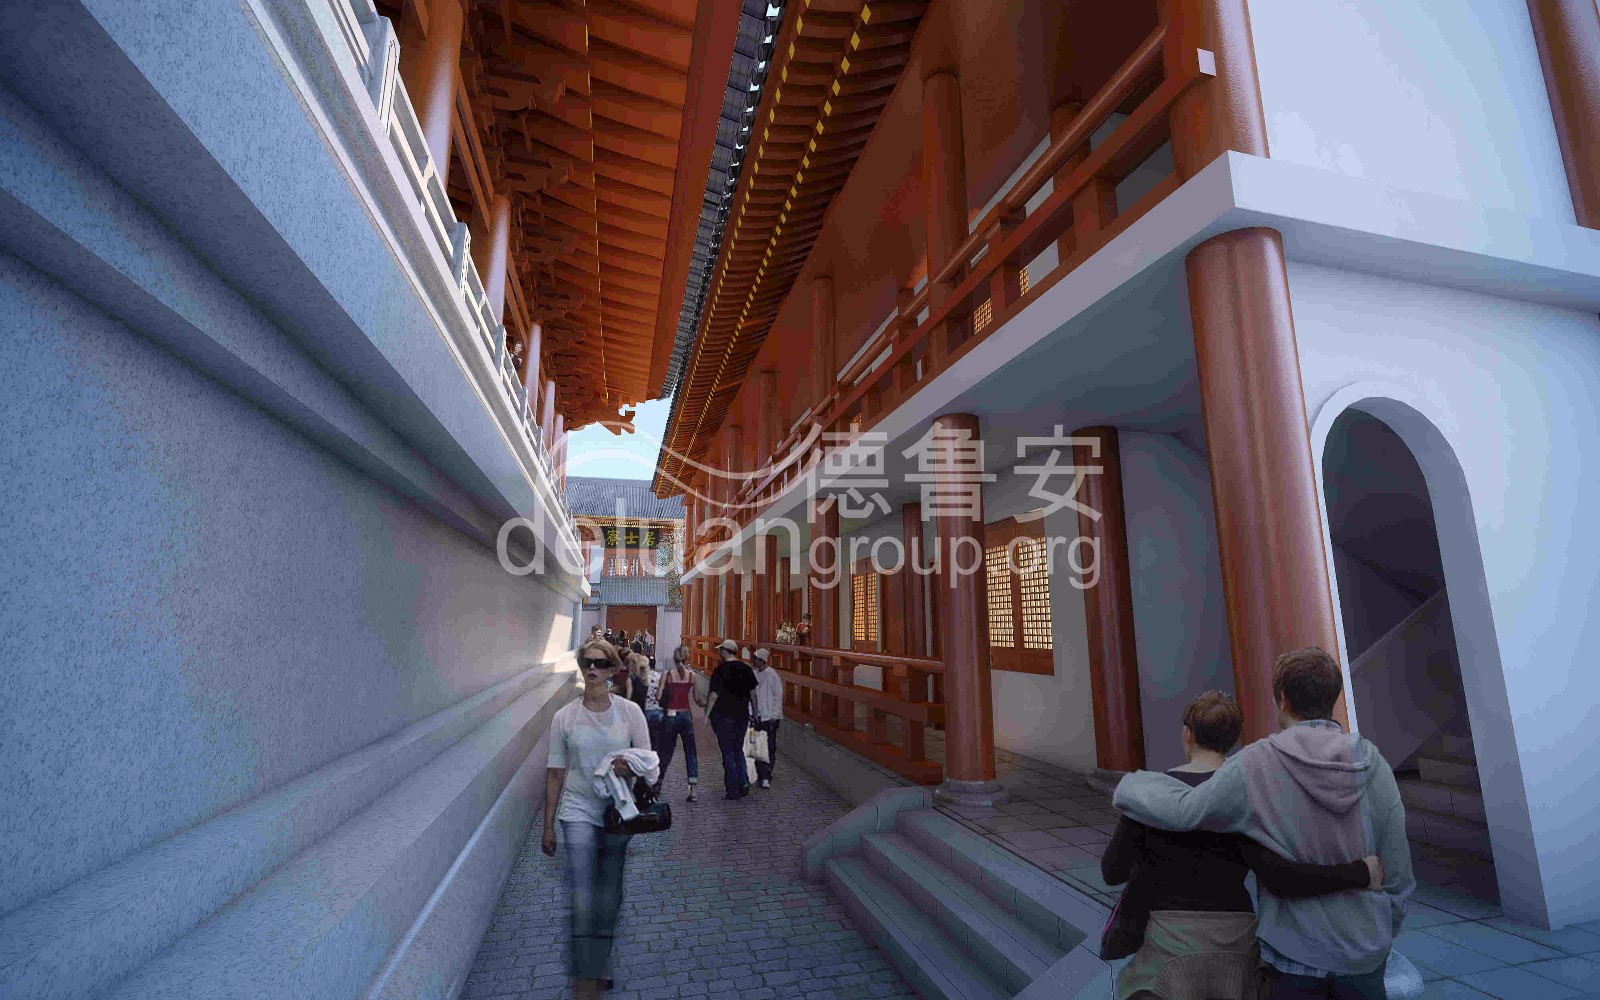 Planning and design of Baoqing temple in Xianghe0(图24)